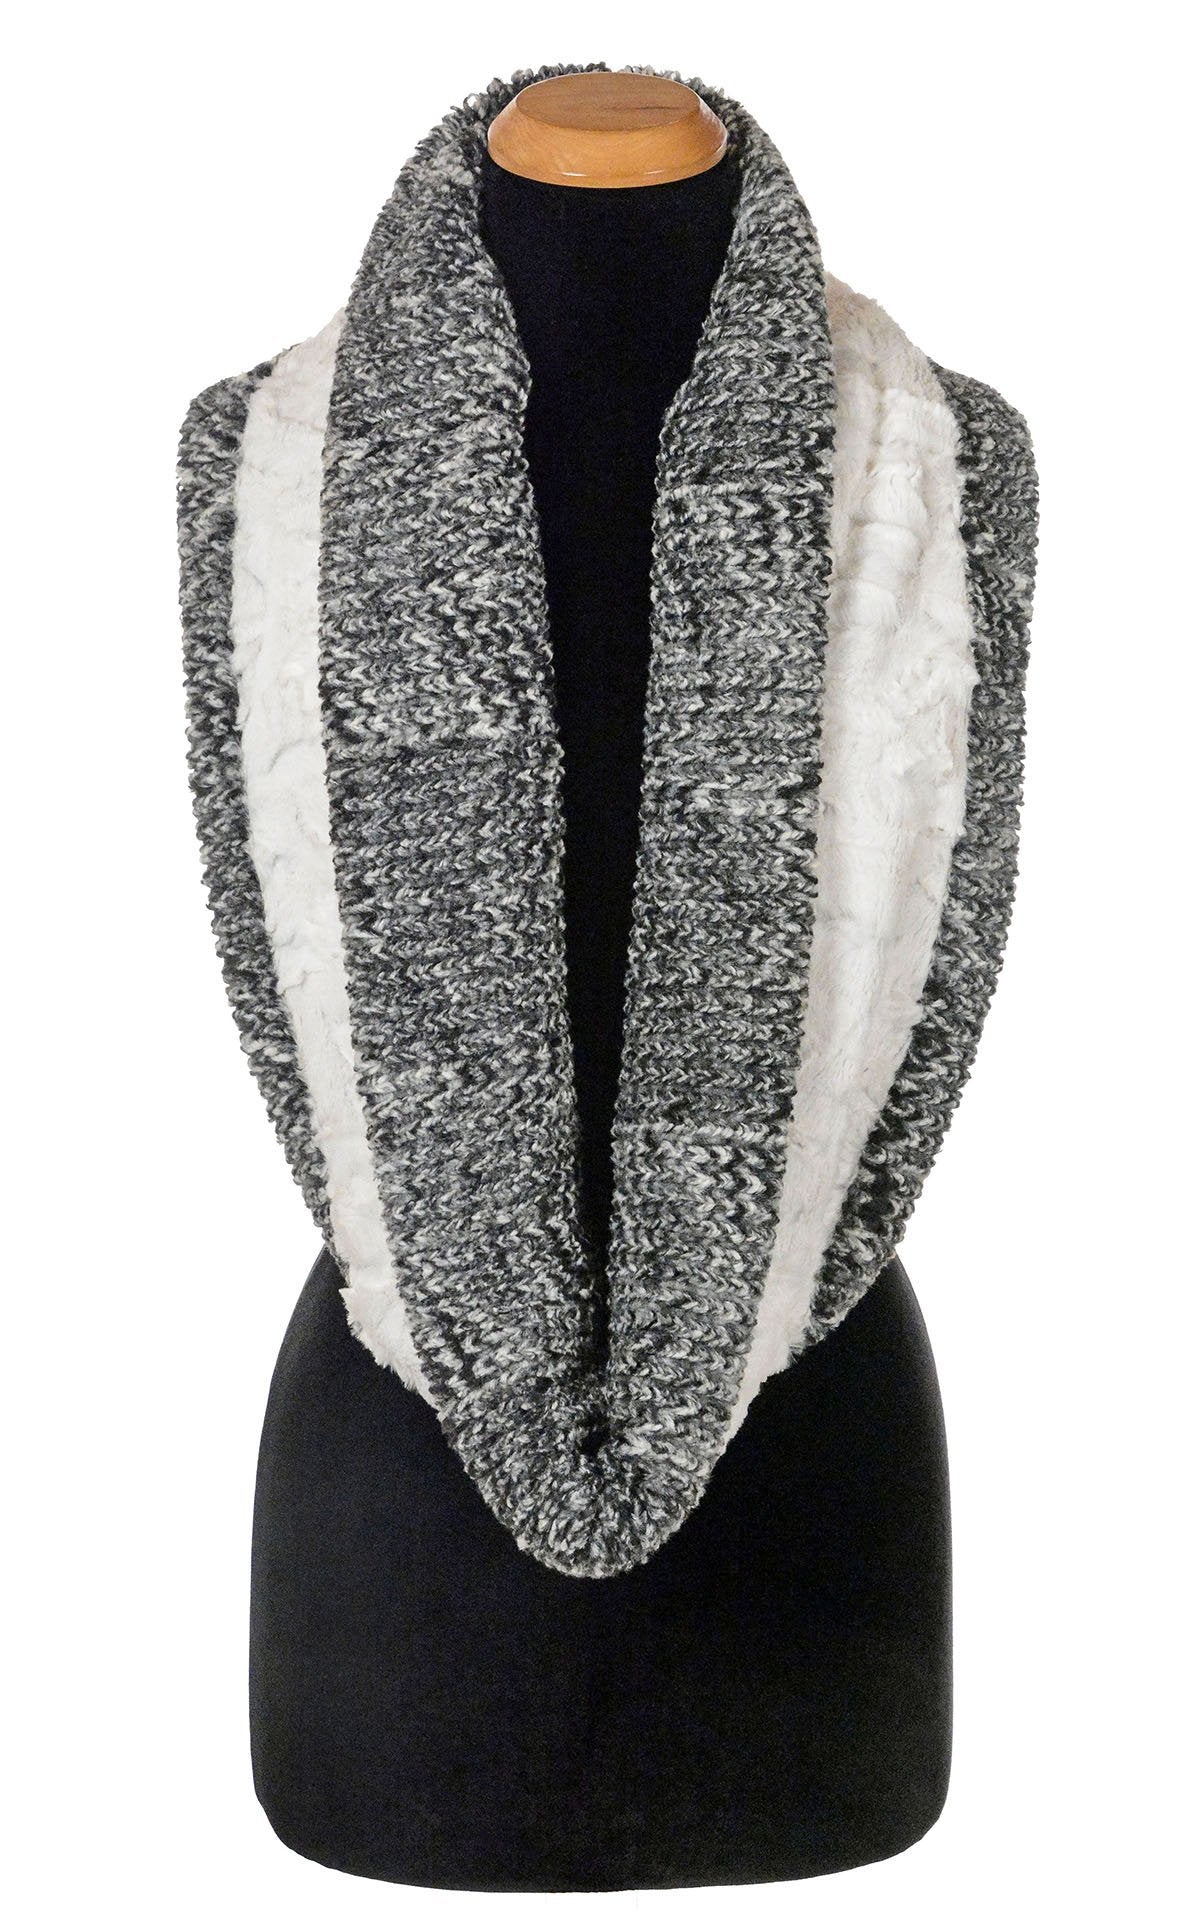 Double Cowl Shrug - Cozy Cable in Ash Faux Fur with Cuddly Fur (Limited Availability)